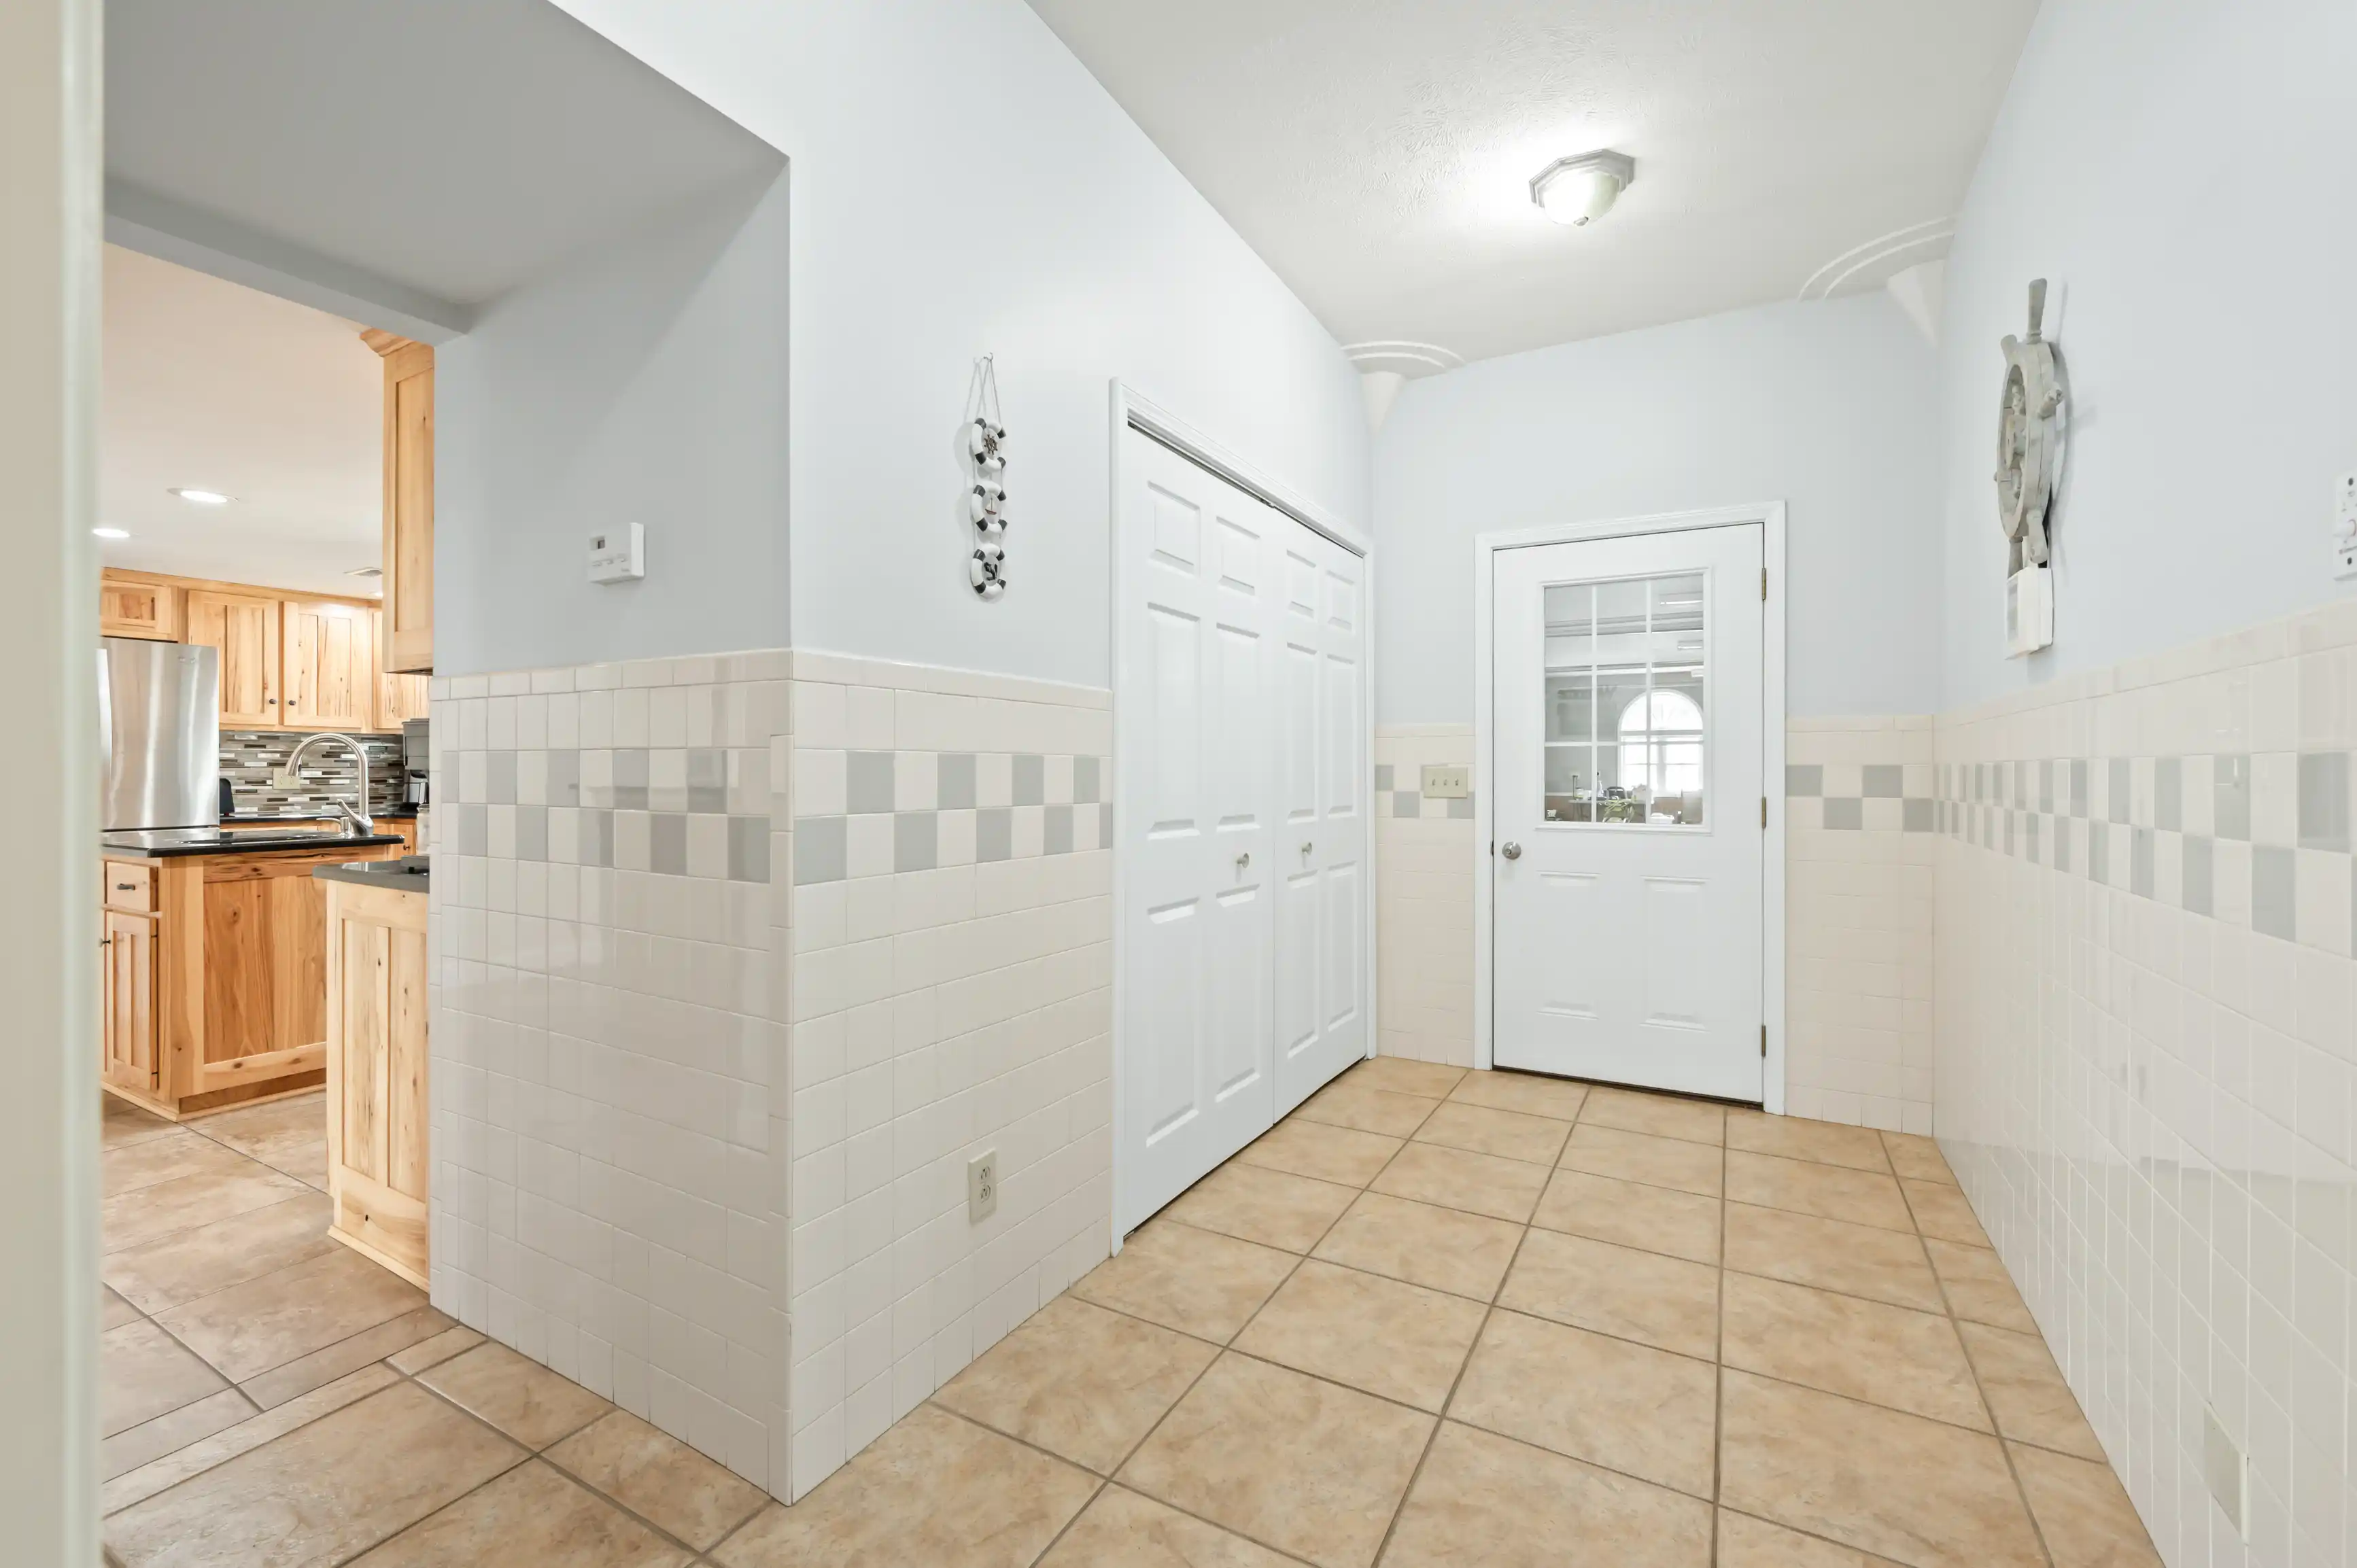 Bright and clean tiled entryway leading to a kitchen with wooden cabinets and modern appliances.